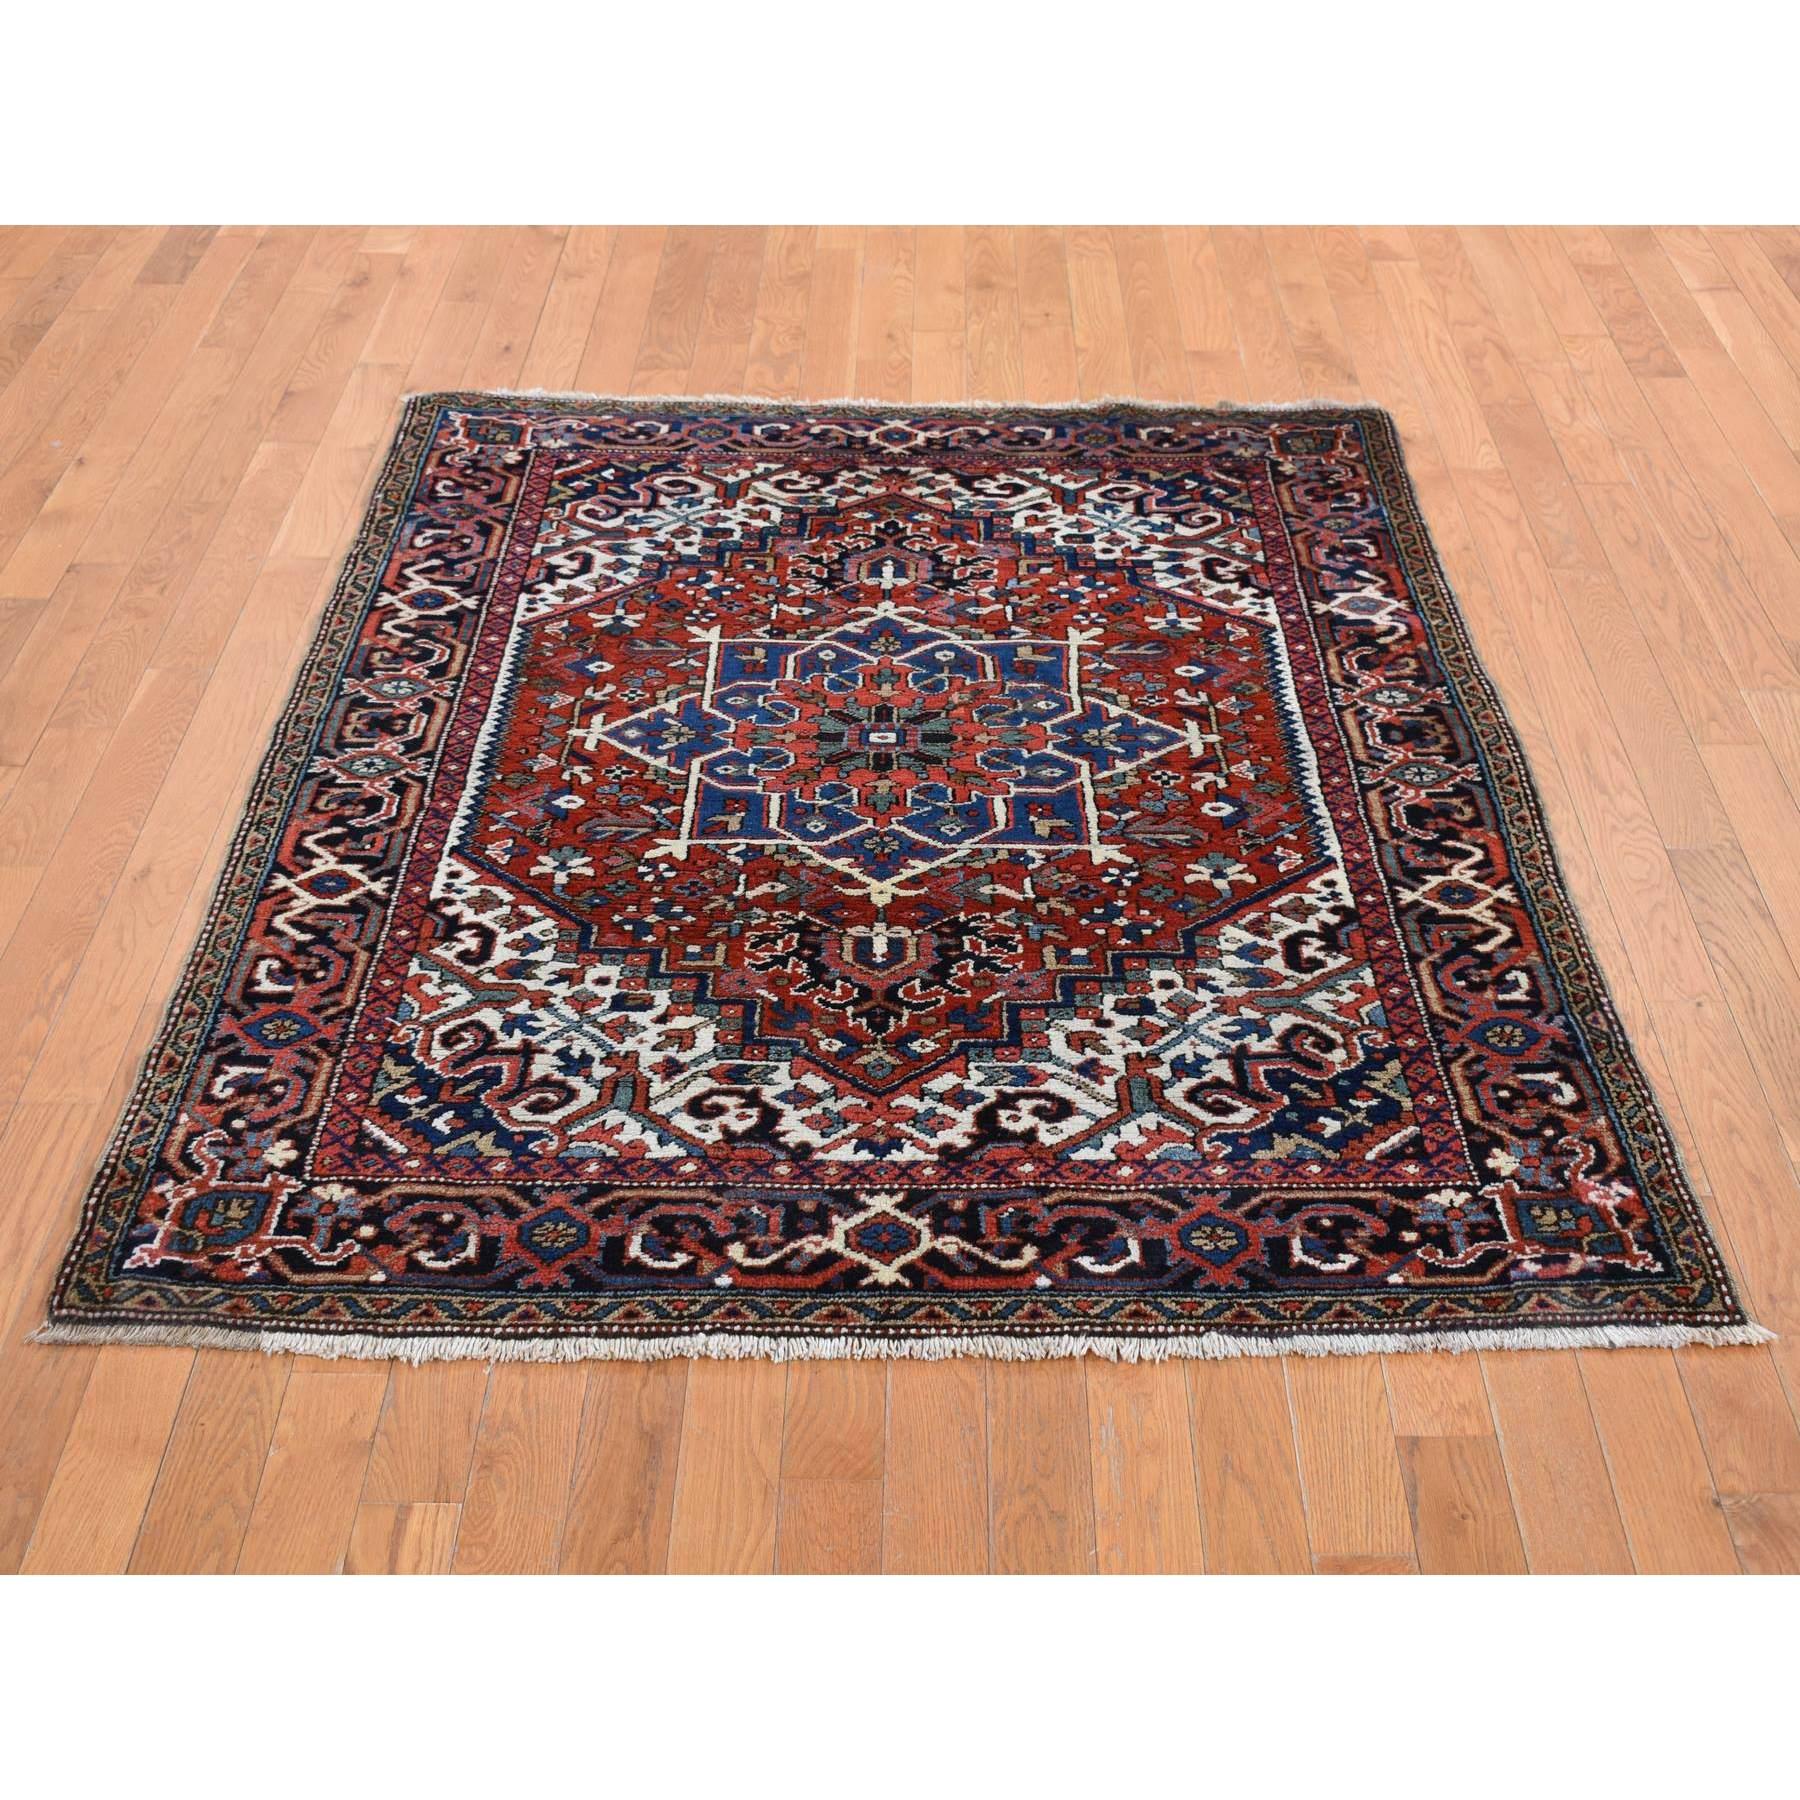 This fabulous Hand-Knotted carpet has been created and designed for extra strength and durability. This rug has been handcrafted for weeks in the traditional method that is used to make
Exact Rug Size in Feet and Inches : 4'9